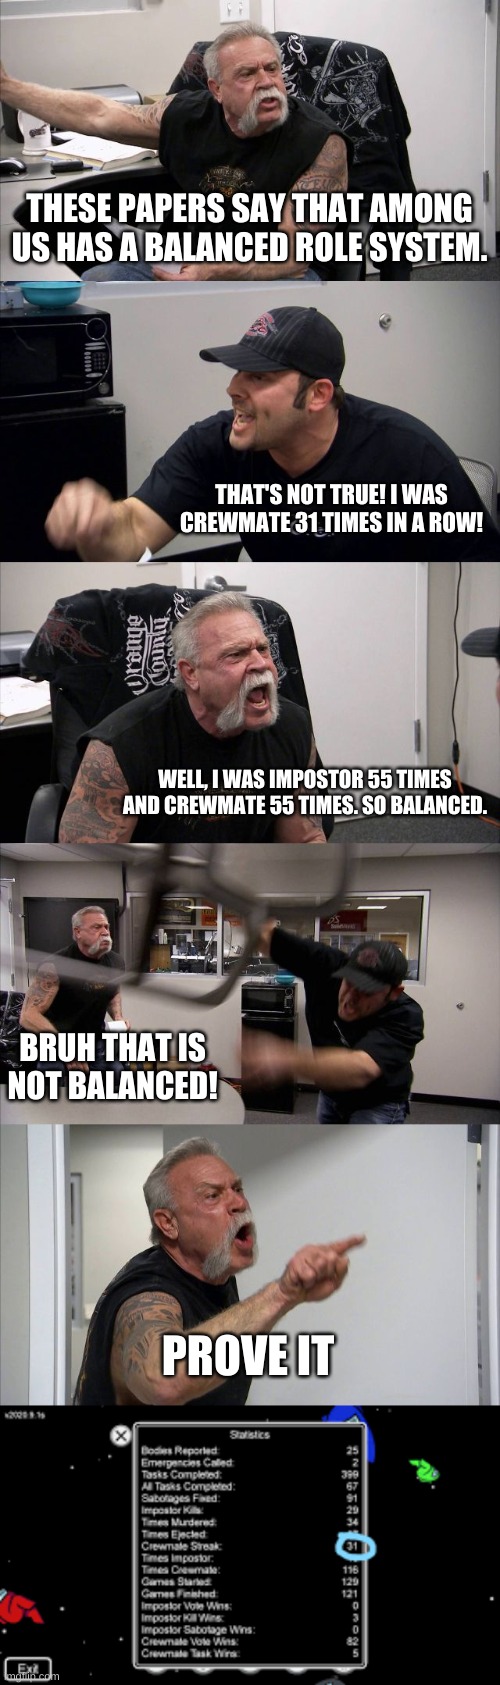 THESE PAPERS SAY THAT AMONG US HAS A BALANCED ROLE SYSTEM. THAT'S NOT TRUE! I WAS CREWMATE 31 TIMES IN A ROW! WELL, I WAS IMPOSTOR 55 TIMES AND CREWMATE 55 TIMES. SO BALANCED. BRUH THAT IS NOT BALANCED! PROVE IT | image tagged in memes,american chopper argument | made w/ Imgflip meme maker